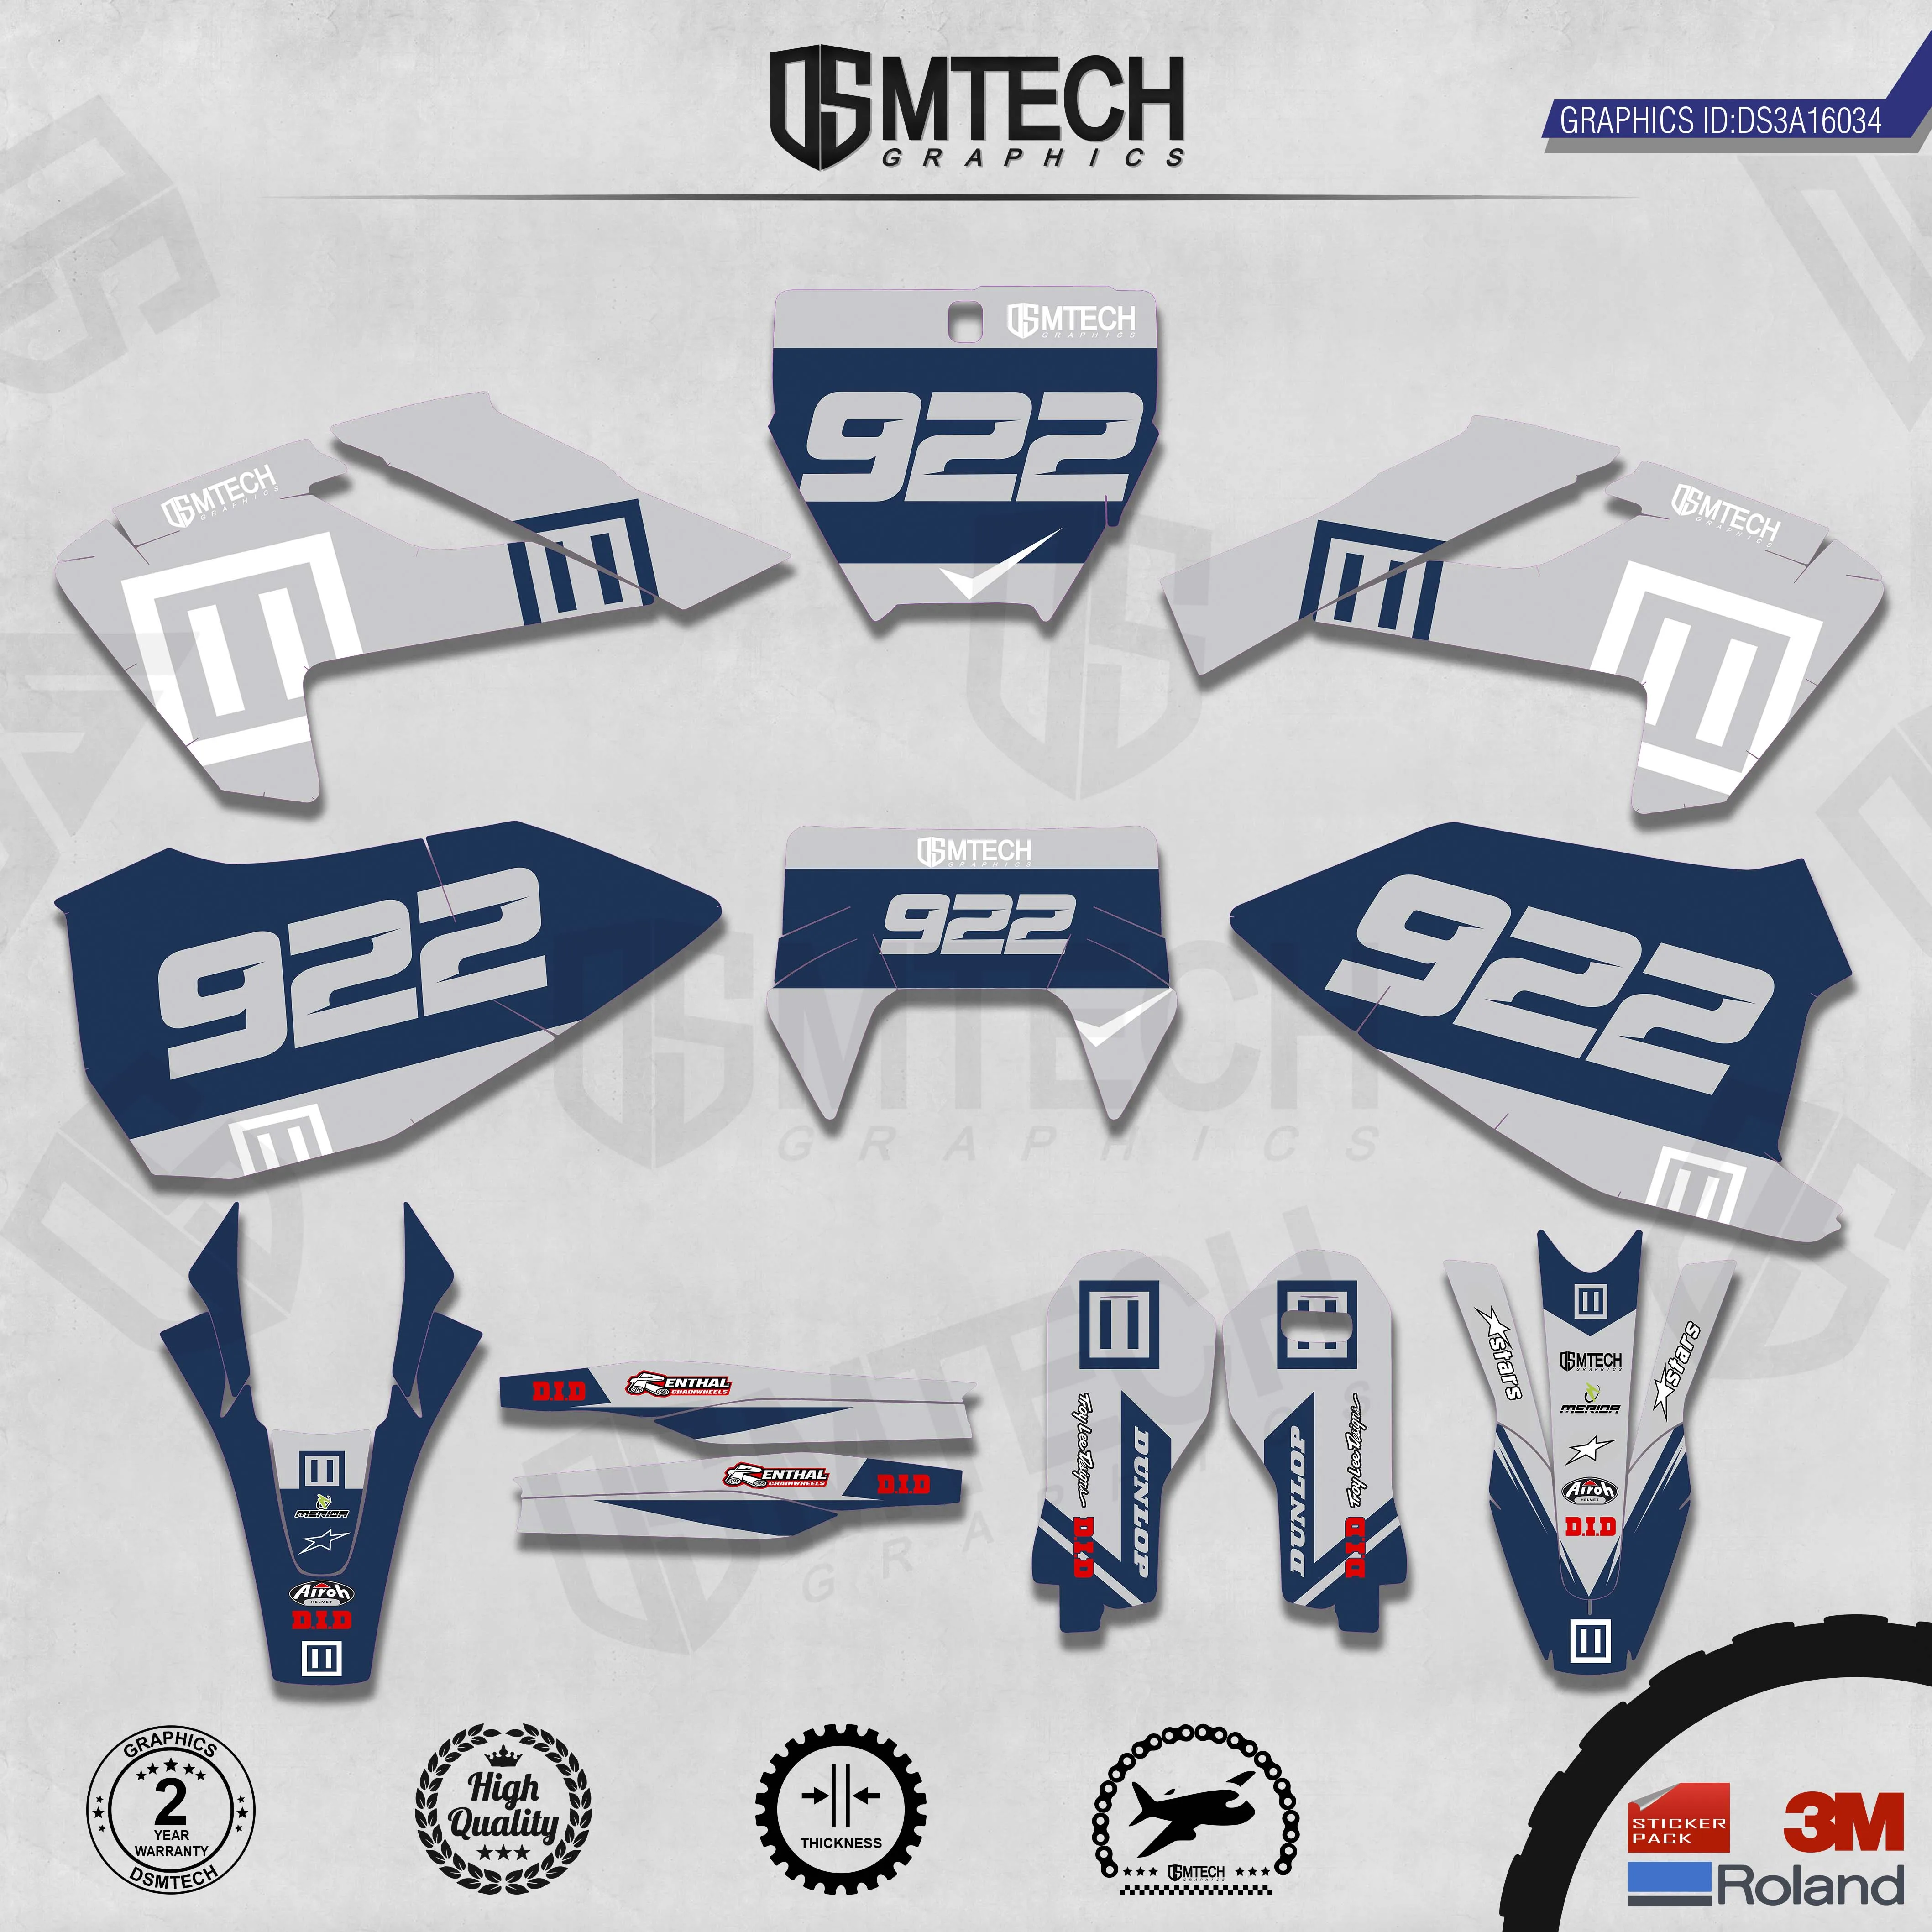 DSMTECH Customized Team Graphics Backgrounds Decals 3M Custom Stickers For TC FC TX FX FS 2016-2018  TE FE 2017-2019  034